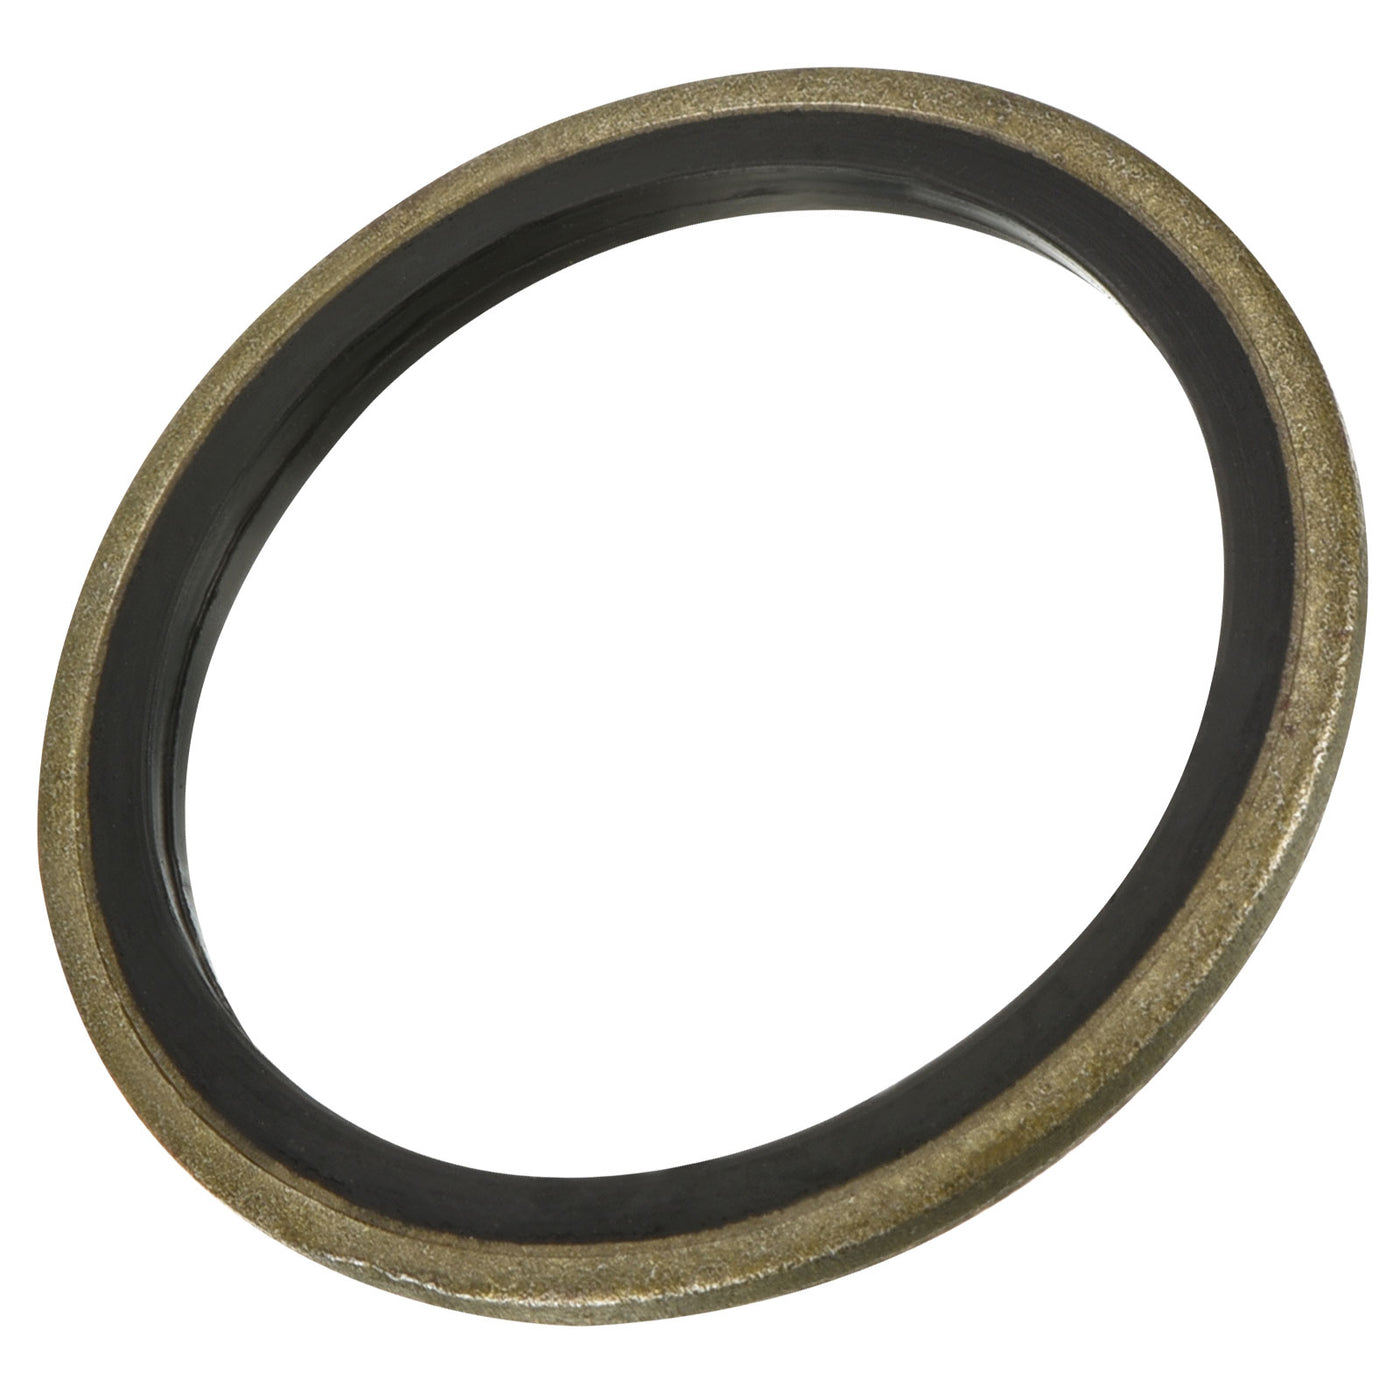 Harfington Bonded Sealing Washers M30 37.4x30x2mm Carbon Steel Nitrile Rubber Gasket, Pack of 10